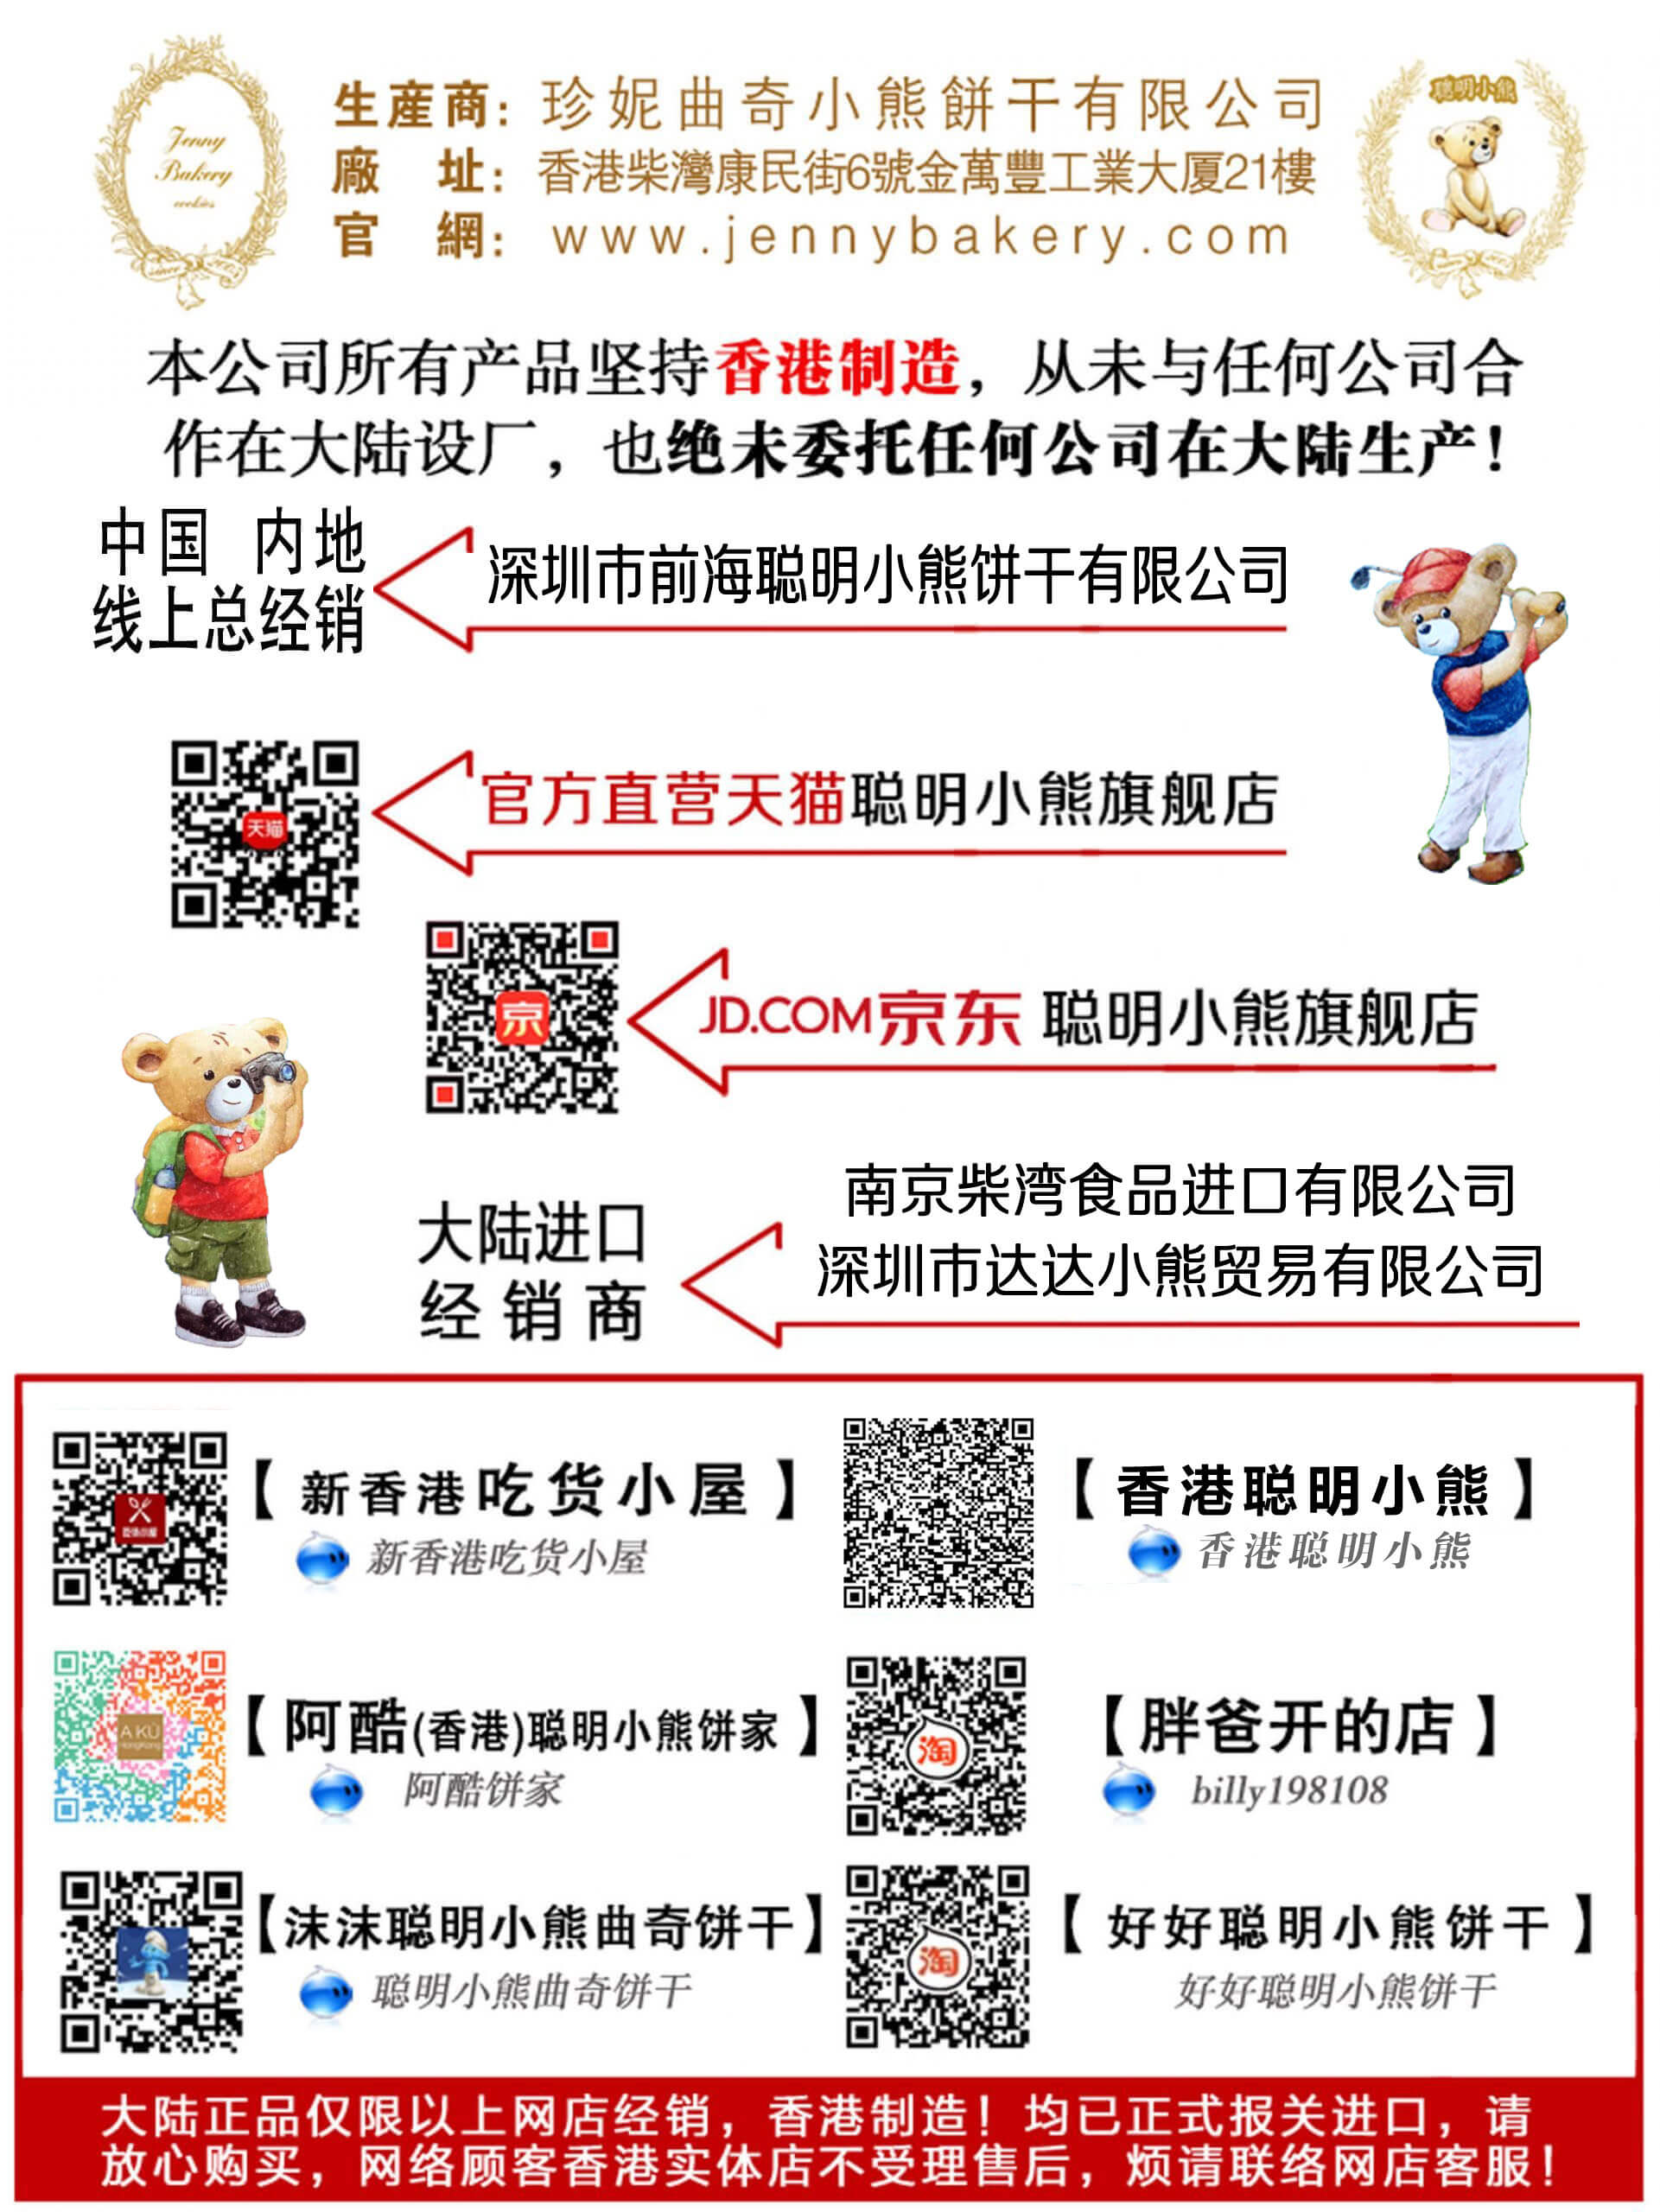 Jenny Bakery QR Code to link to official Taobao stores. Please buy only from these store